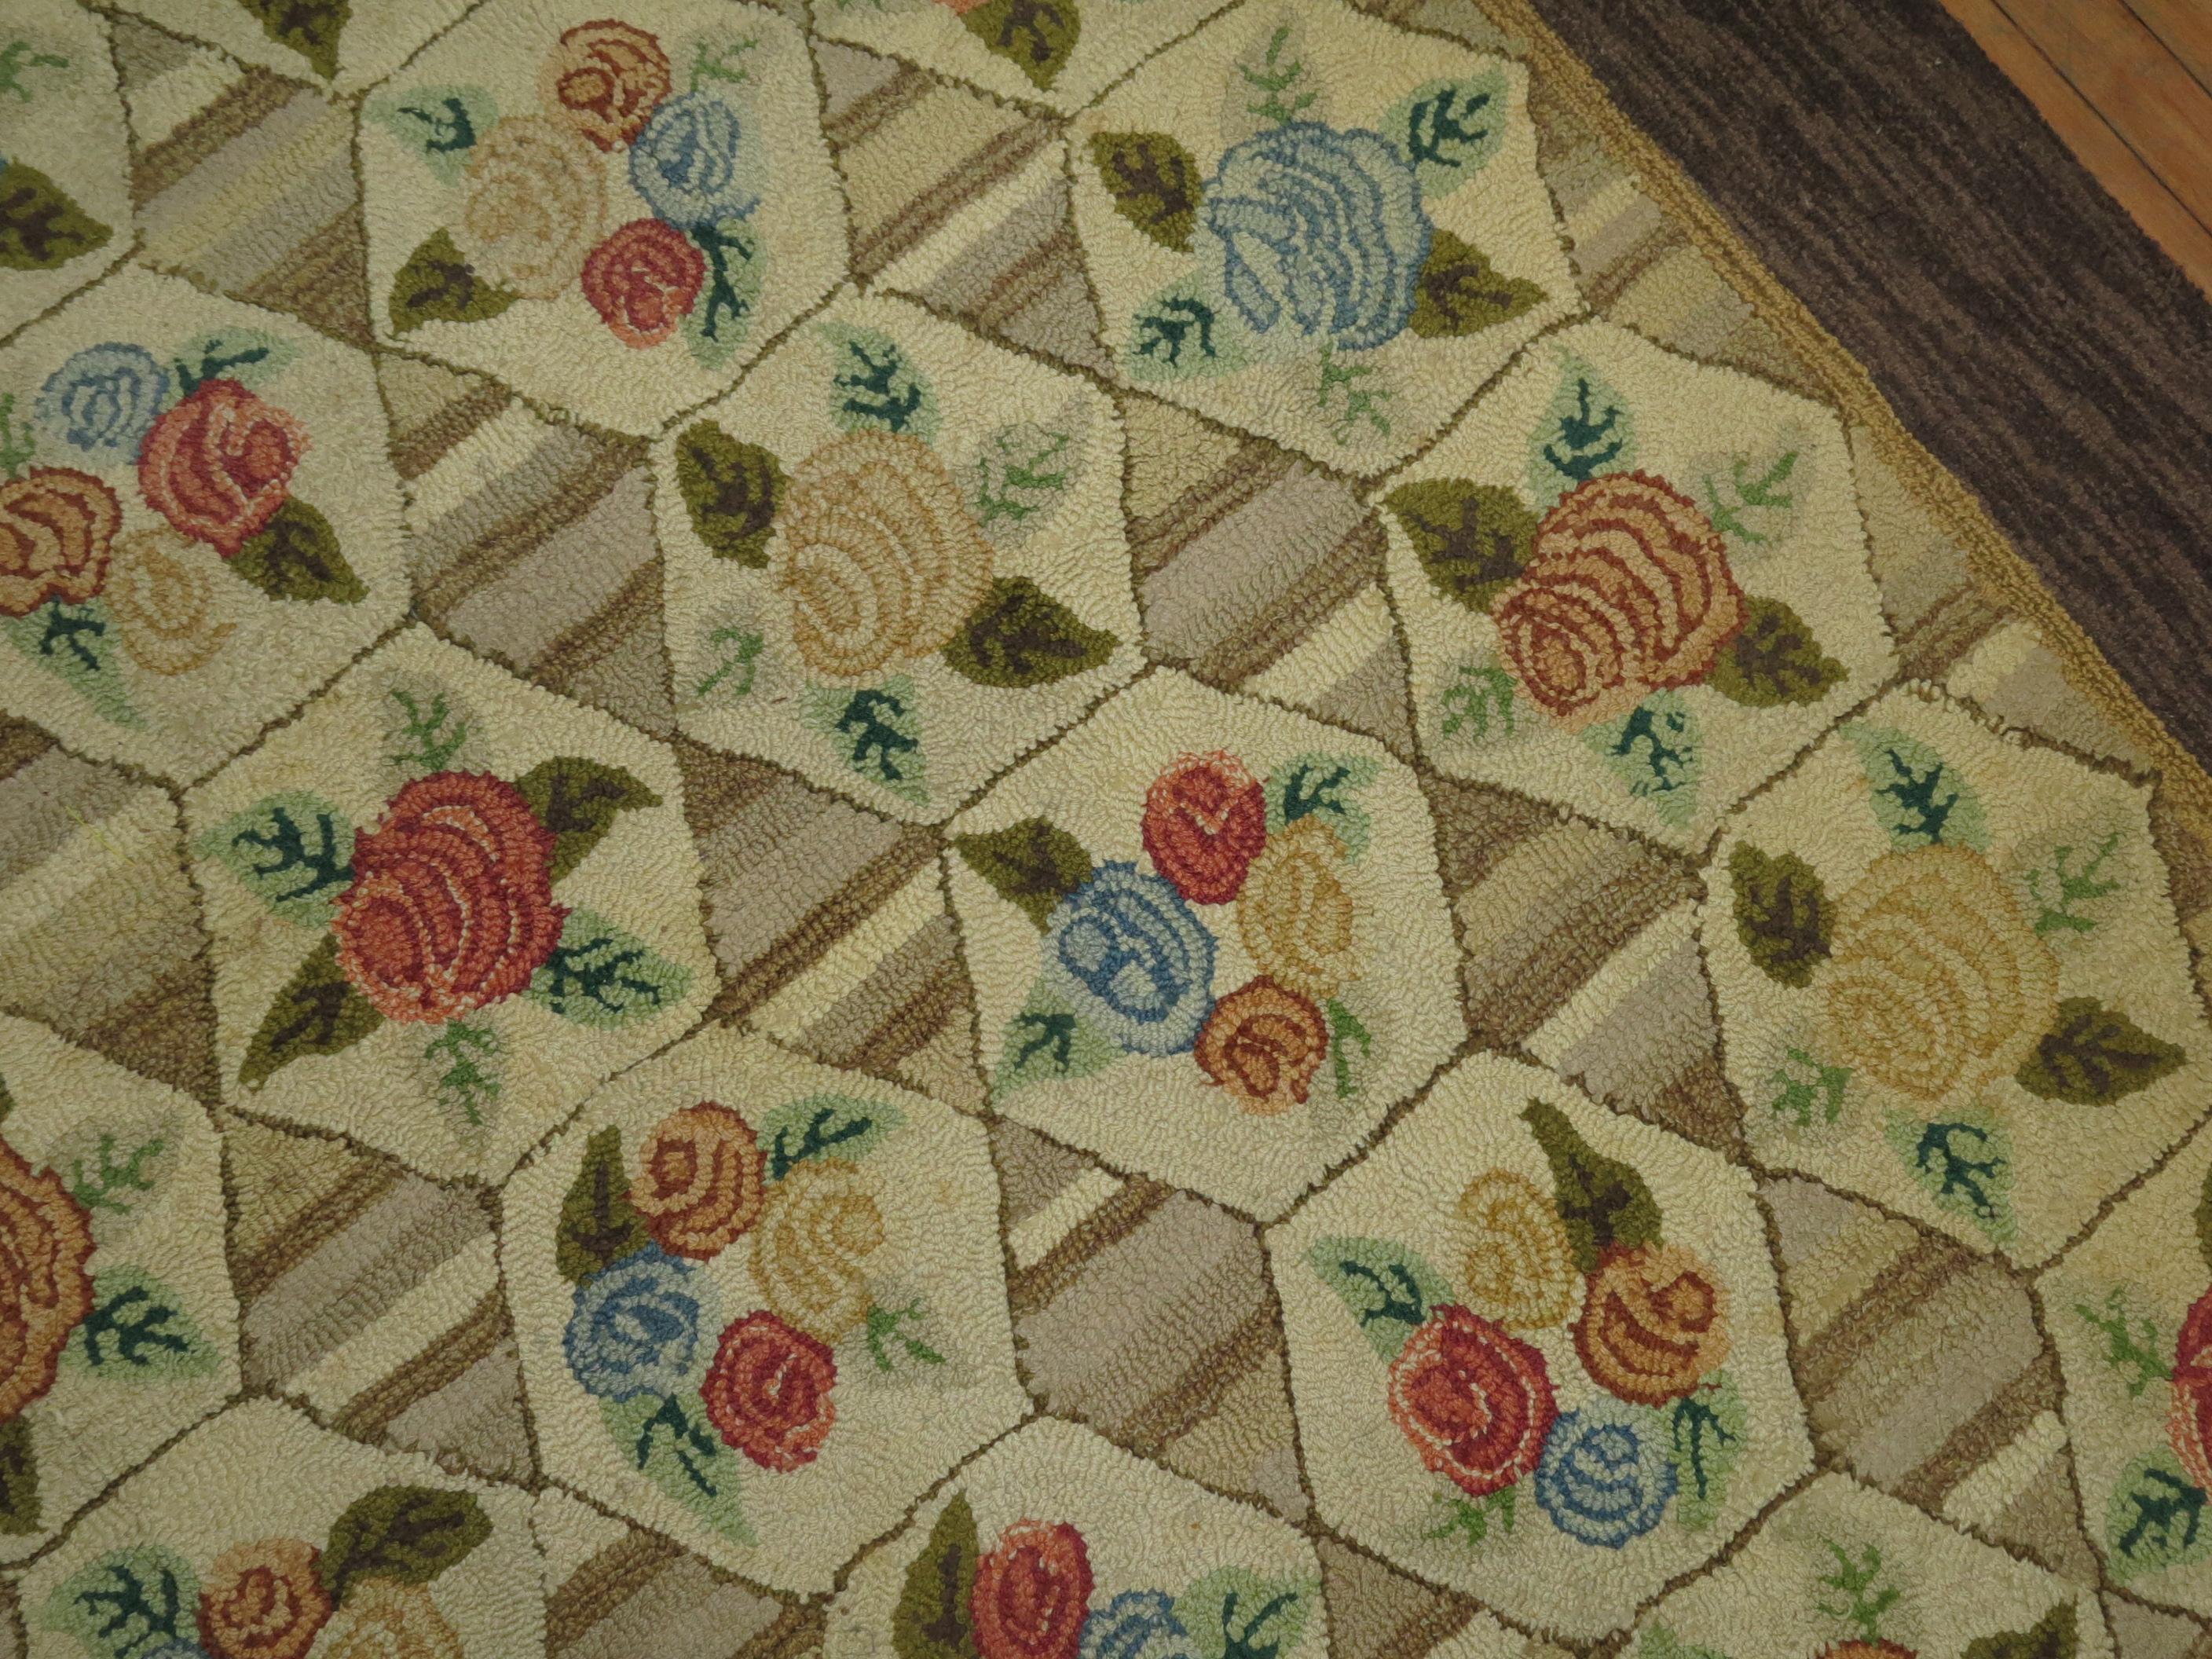 Rustic Color Floral Motif American Hooked Room Size Rug, Mid-20th Century In Good Condition For Sale In New York, NY